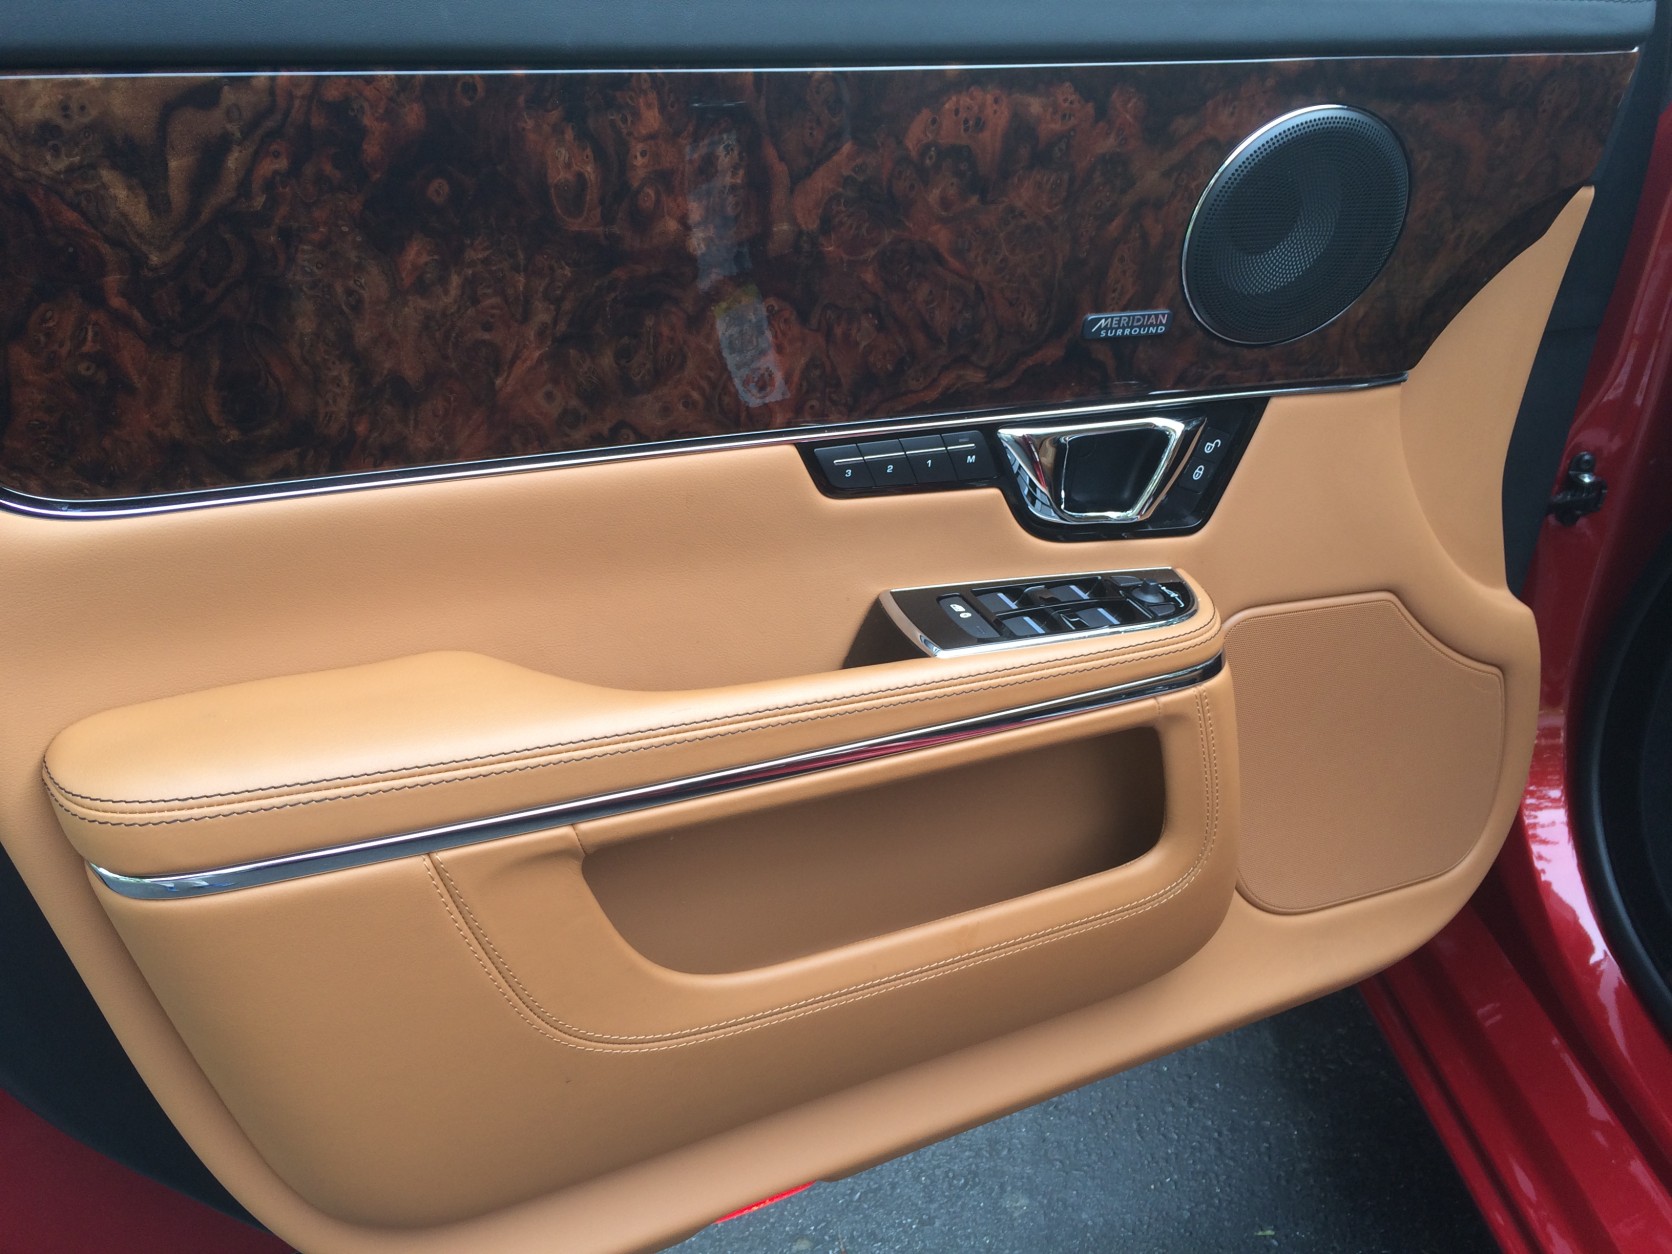 The 2016 Jaguar XJL Portfolio’s interior doesn’t have as much wood as Jaguars in the past, but it's still very British inside, and the smell of wood and leather is intoxicating. (WTOP/Mike Parris)